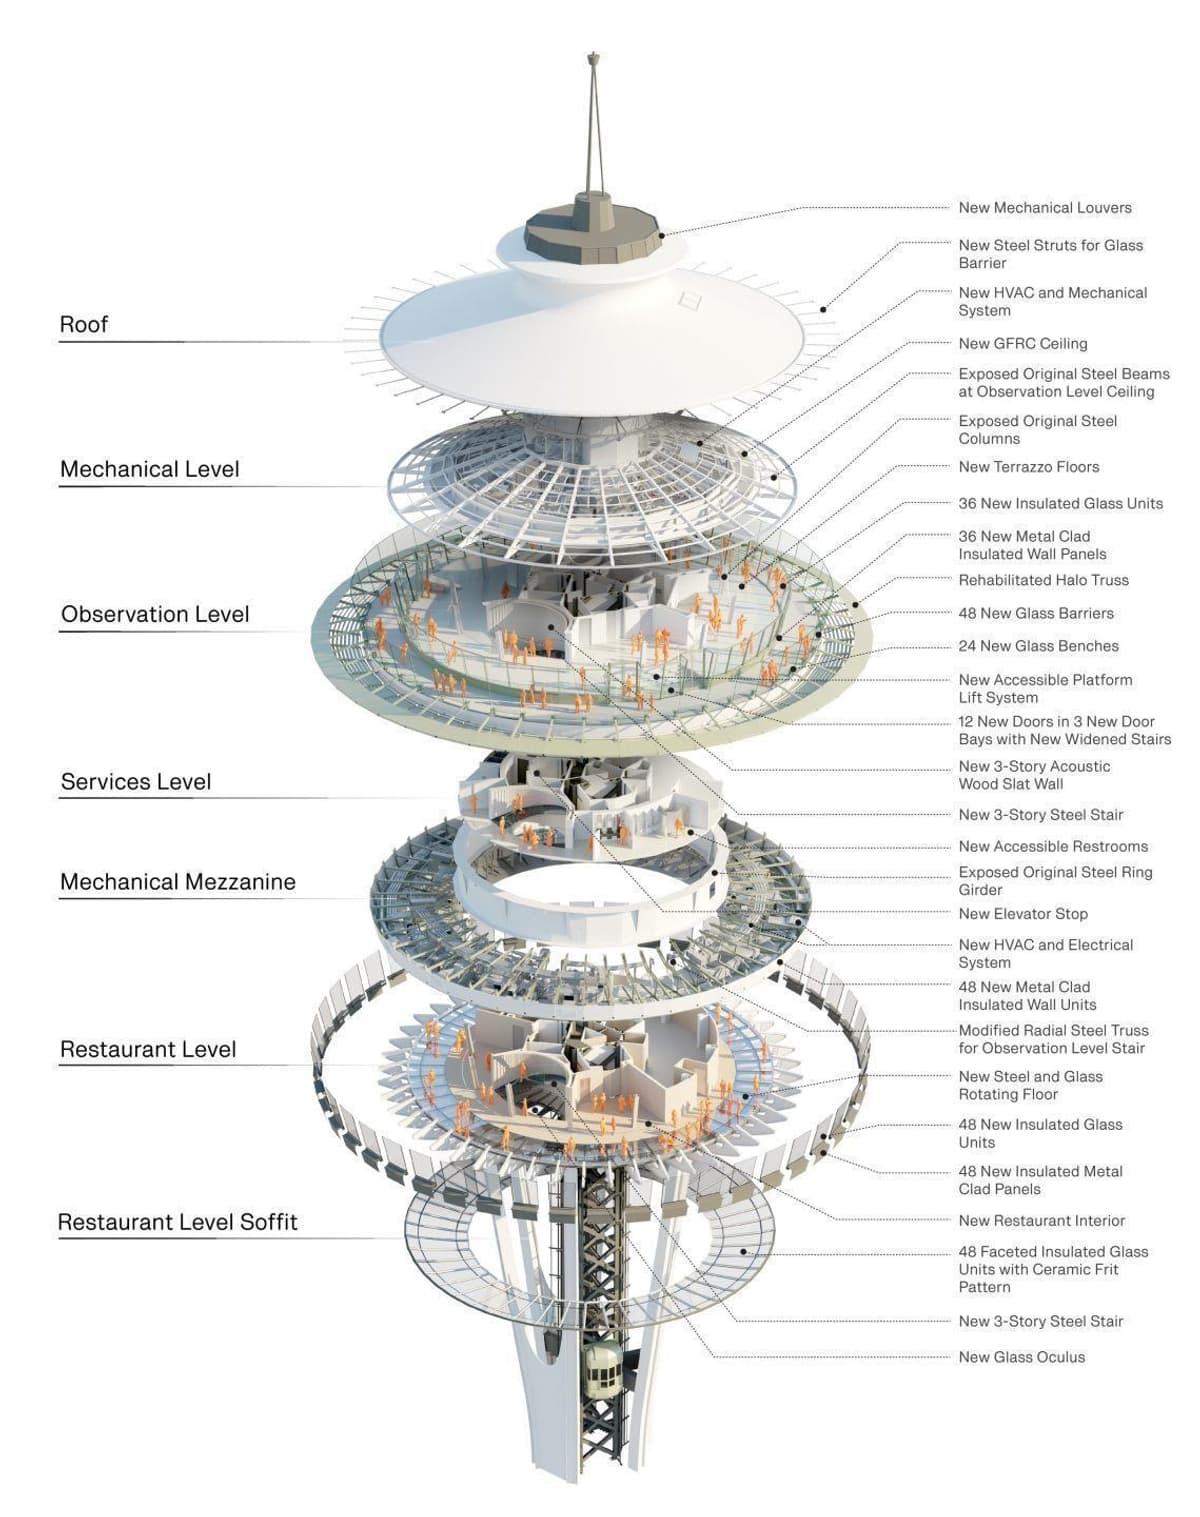 A picture showing the regeneration of the Seattle Space Needle for the Century Project.